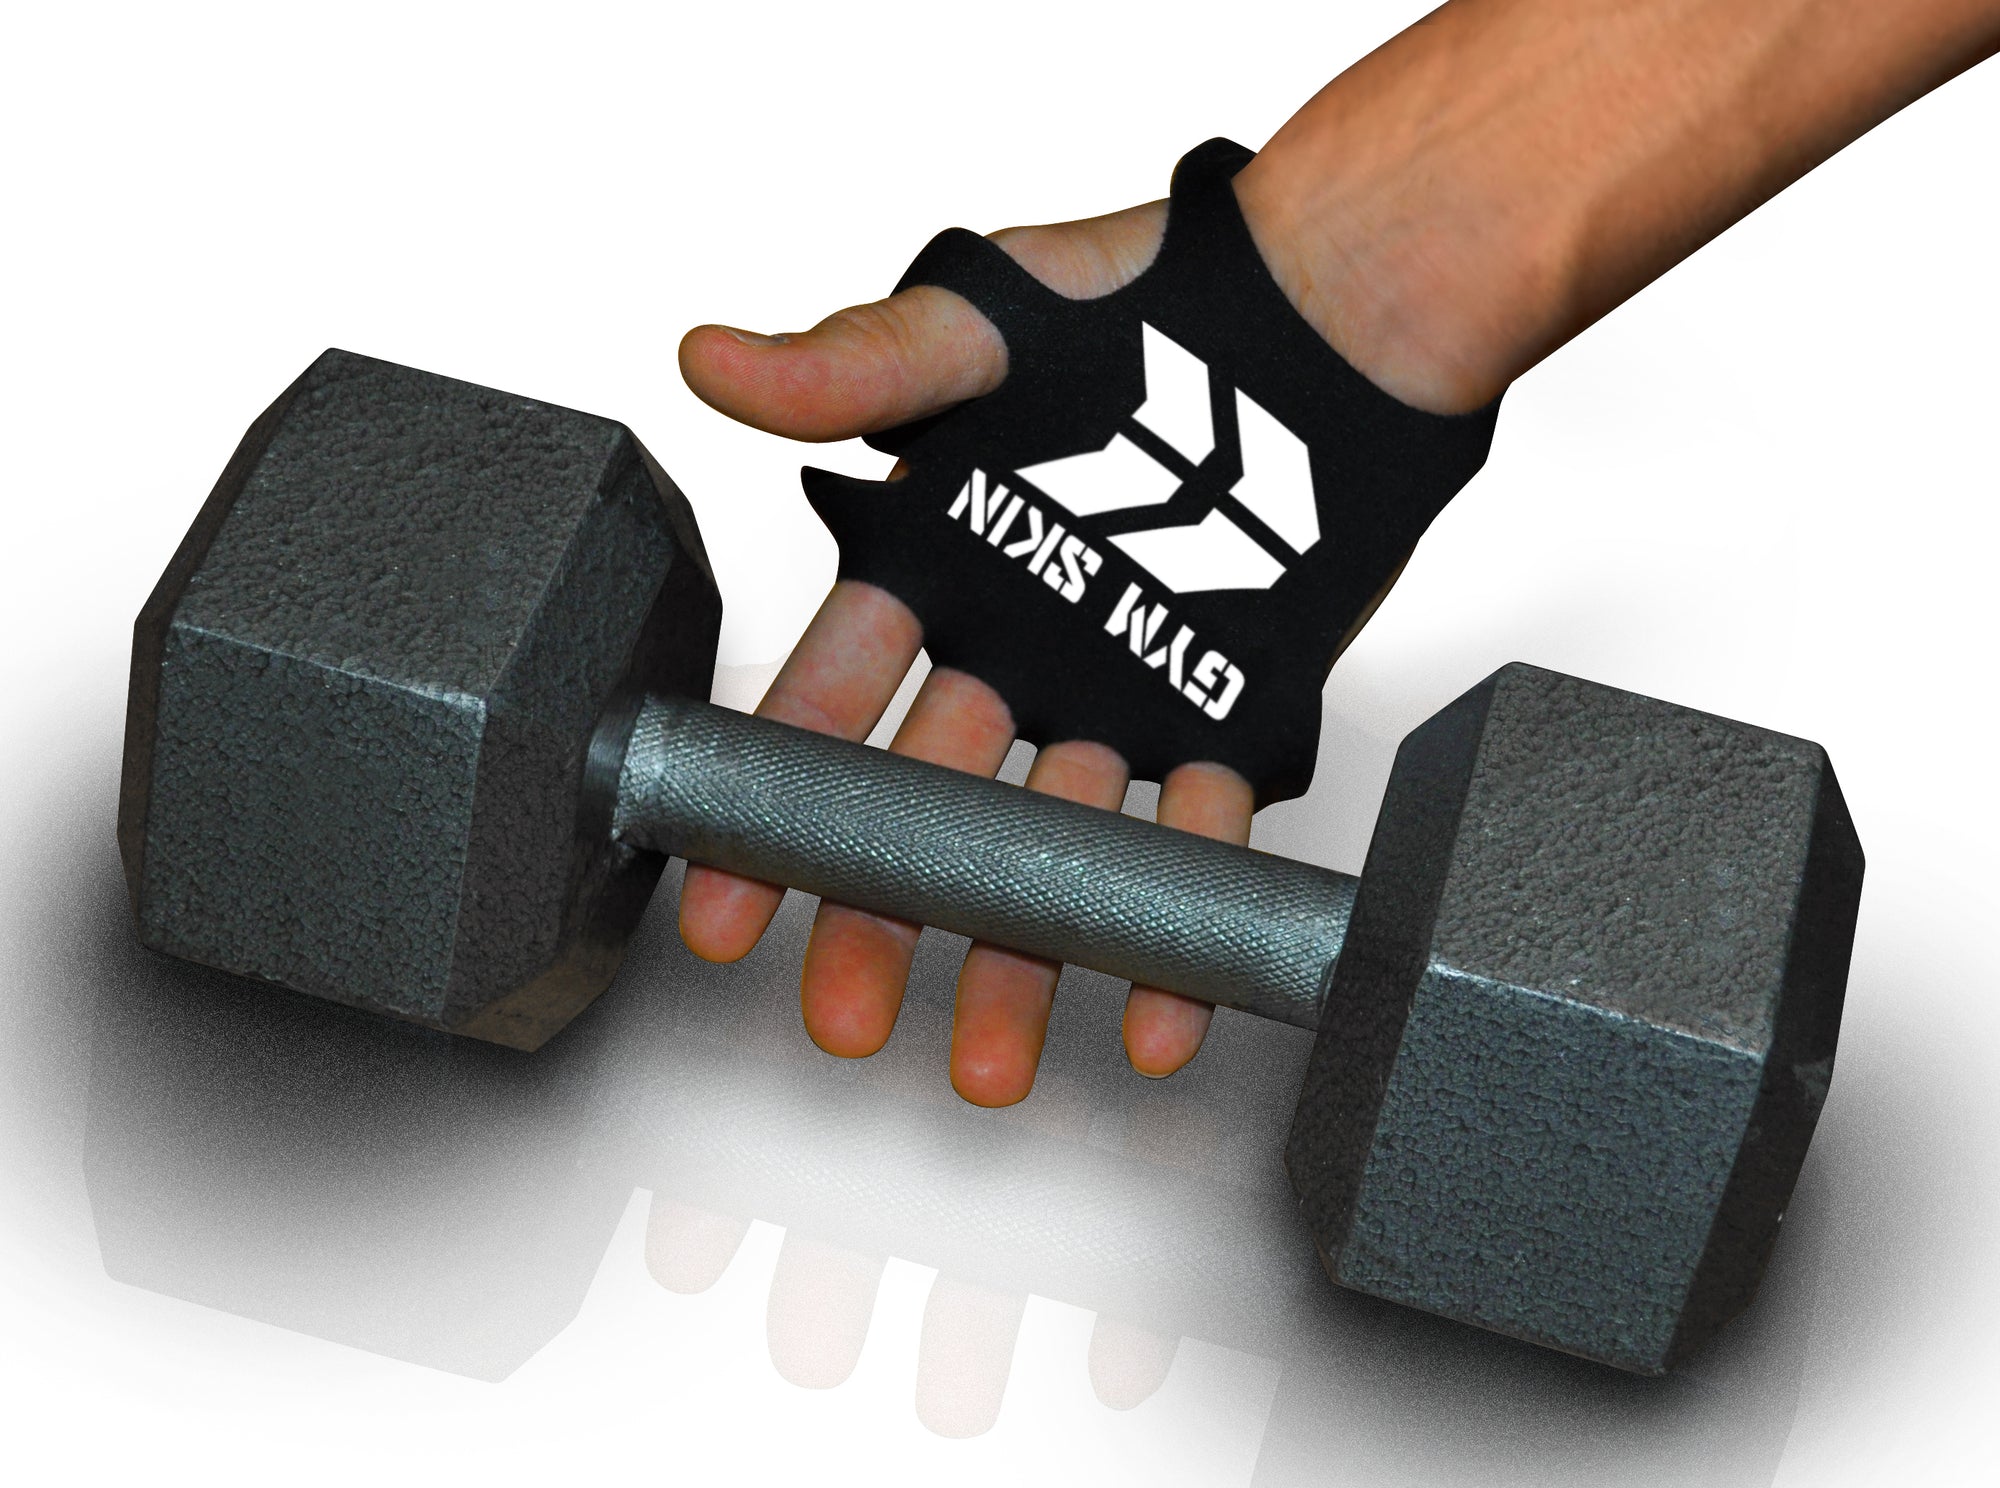 hand wearing gym skin palm protectors reaching for a free weight